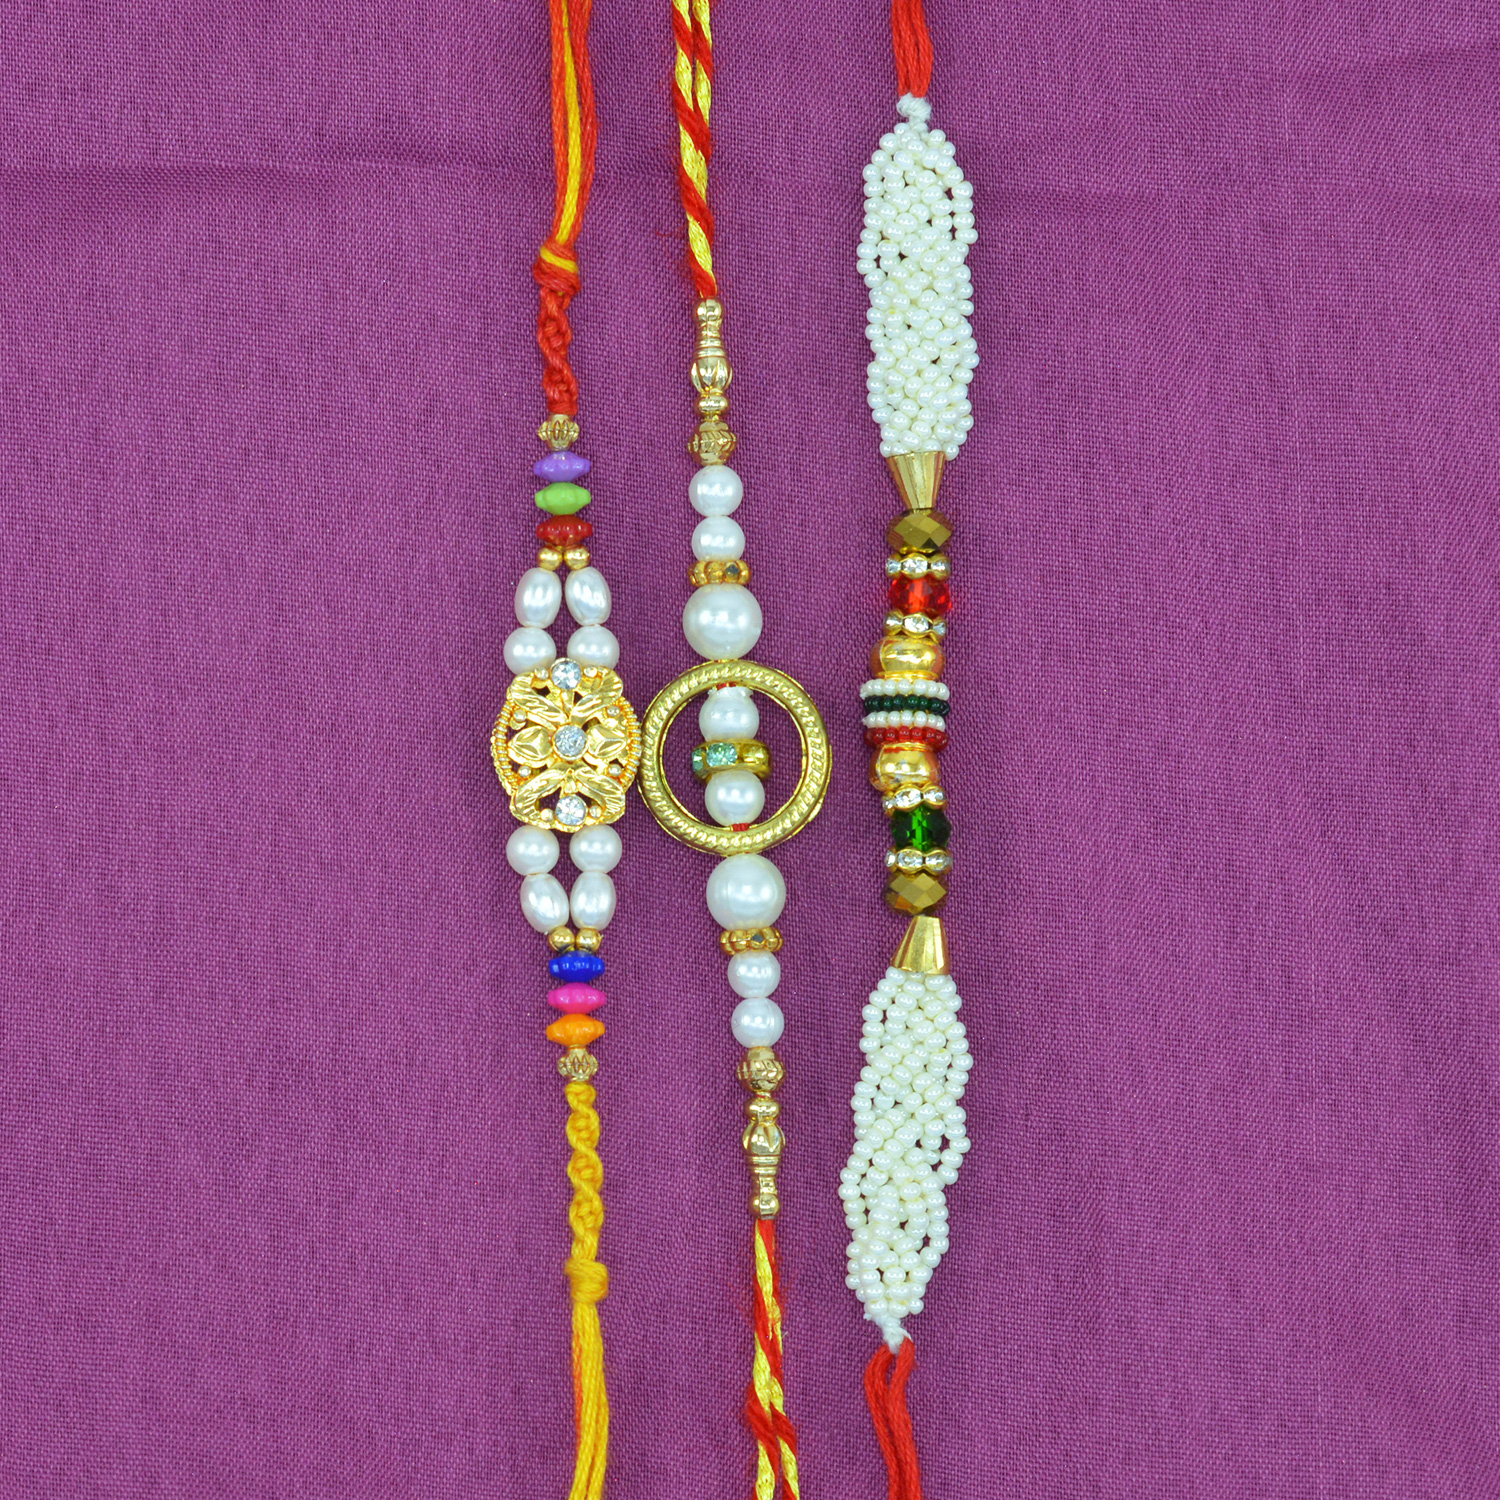 White Beads Special Fancy and Thread Liner Stunning Looking Rakhis Set of 3